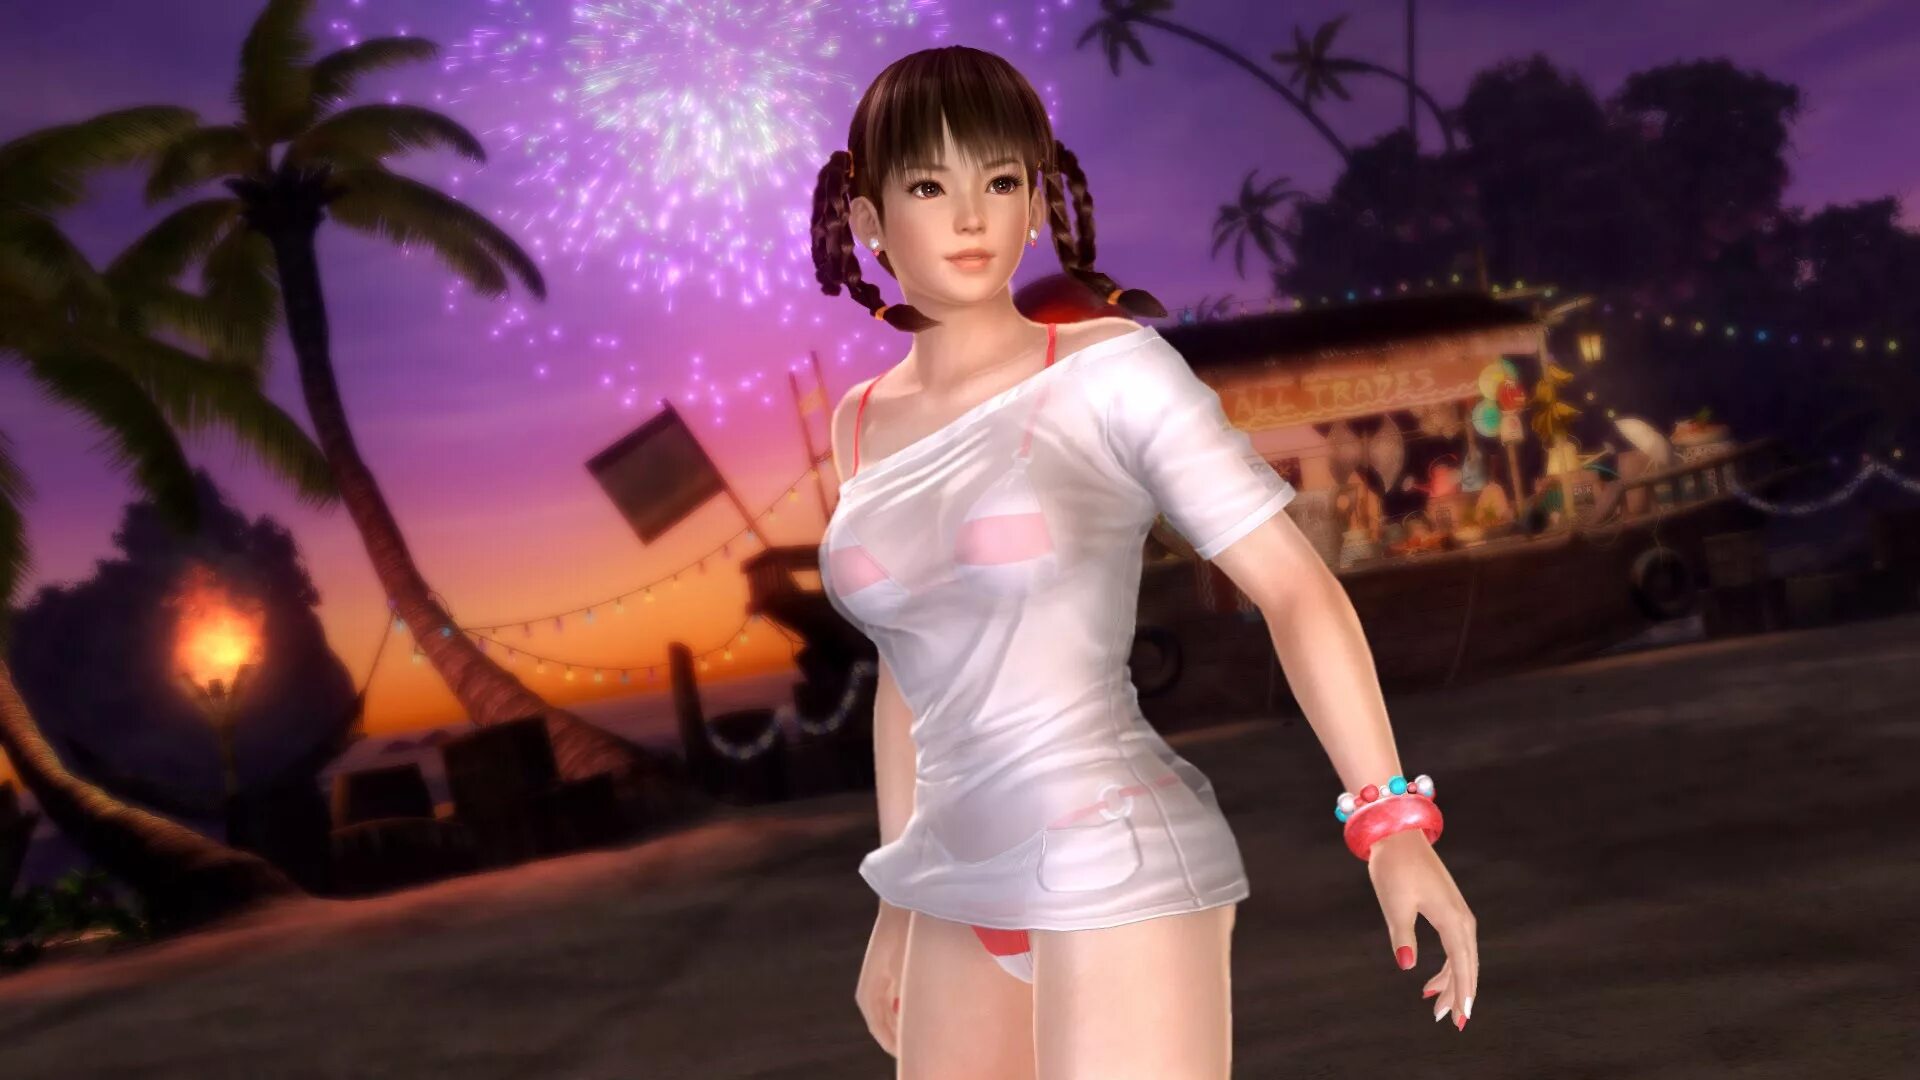 Dead or Alive 3 игра. Leifang Doa 5. Dead or Alive Xtreme 3 Leifang. Dead or Alive 5. Игры взрослых дам